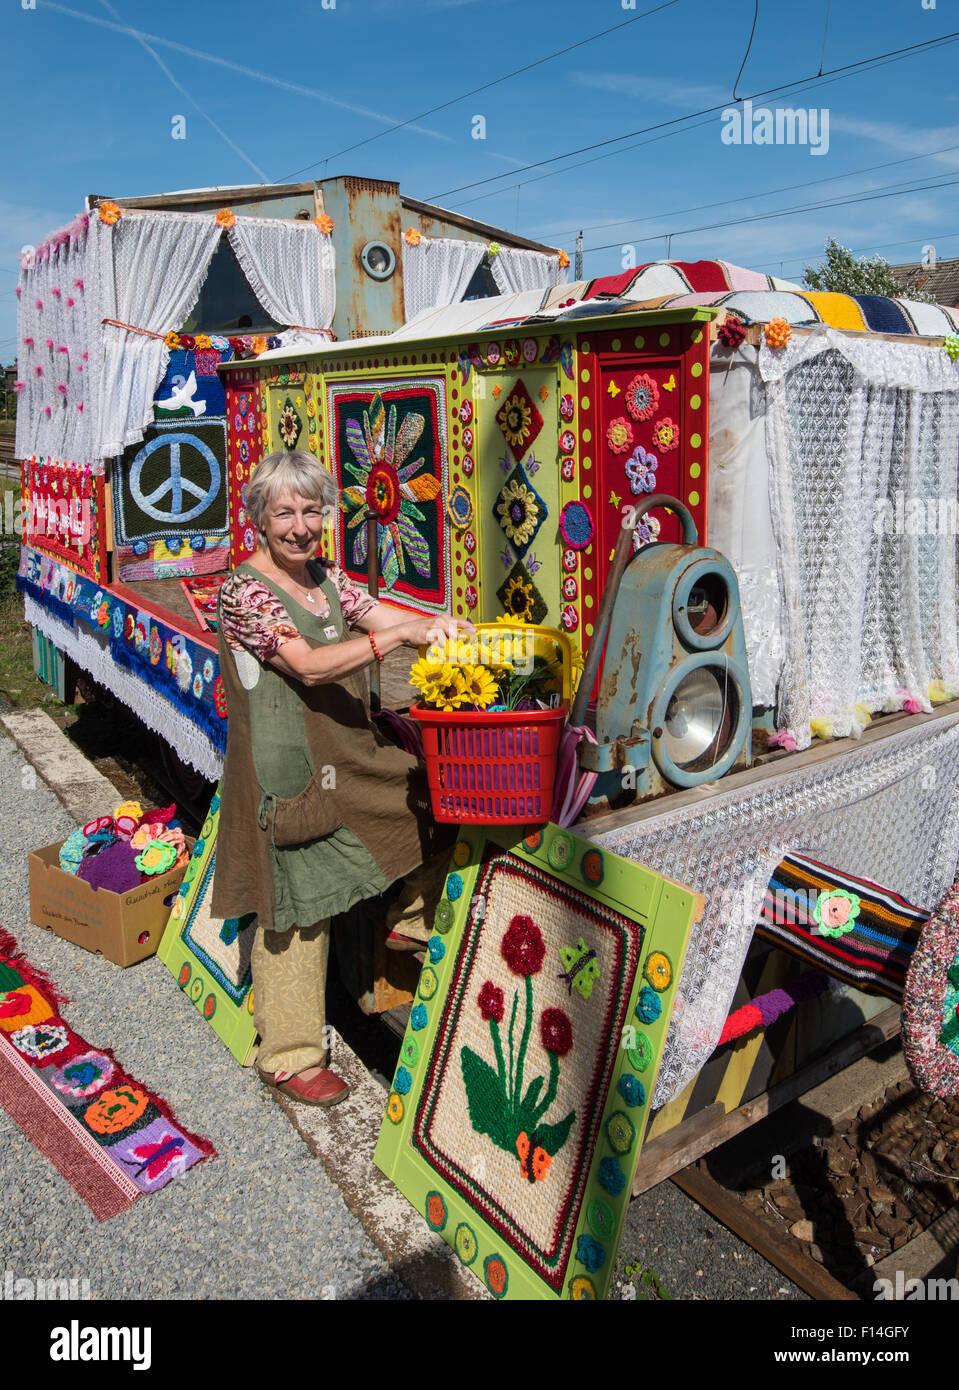 Peace activist and co-initiator Christa Senberg stands in front of an old diesel locomotive covered by a colourful knitted garment at a hand car depot in Zossen, Germany, 26 August 2015. Held for the second time at this location is the movement 'Knitting for Peace'. After a huge success in 2013, where many dedicated knitting and crochet fans from all over Germany and neighbouring countries turned the diesel locomotives into symbols for piece, there is now a sequel event.  Under the slogan 'Make love, not war' Visitors and friends of small trains have been invited to submit their colourful knit Stock Photo